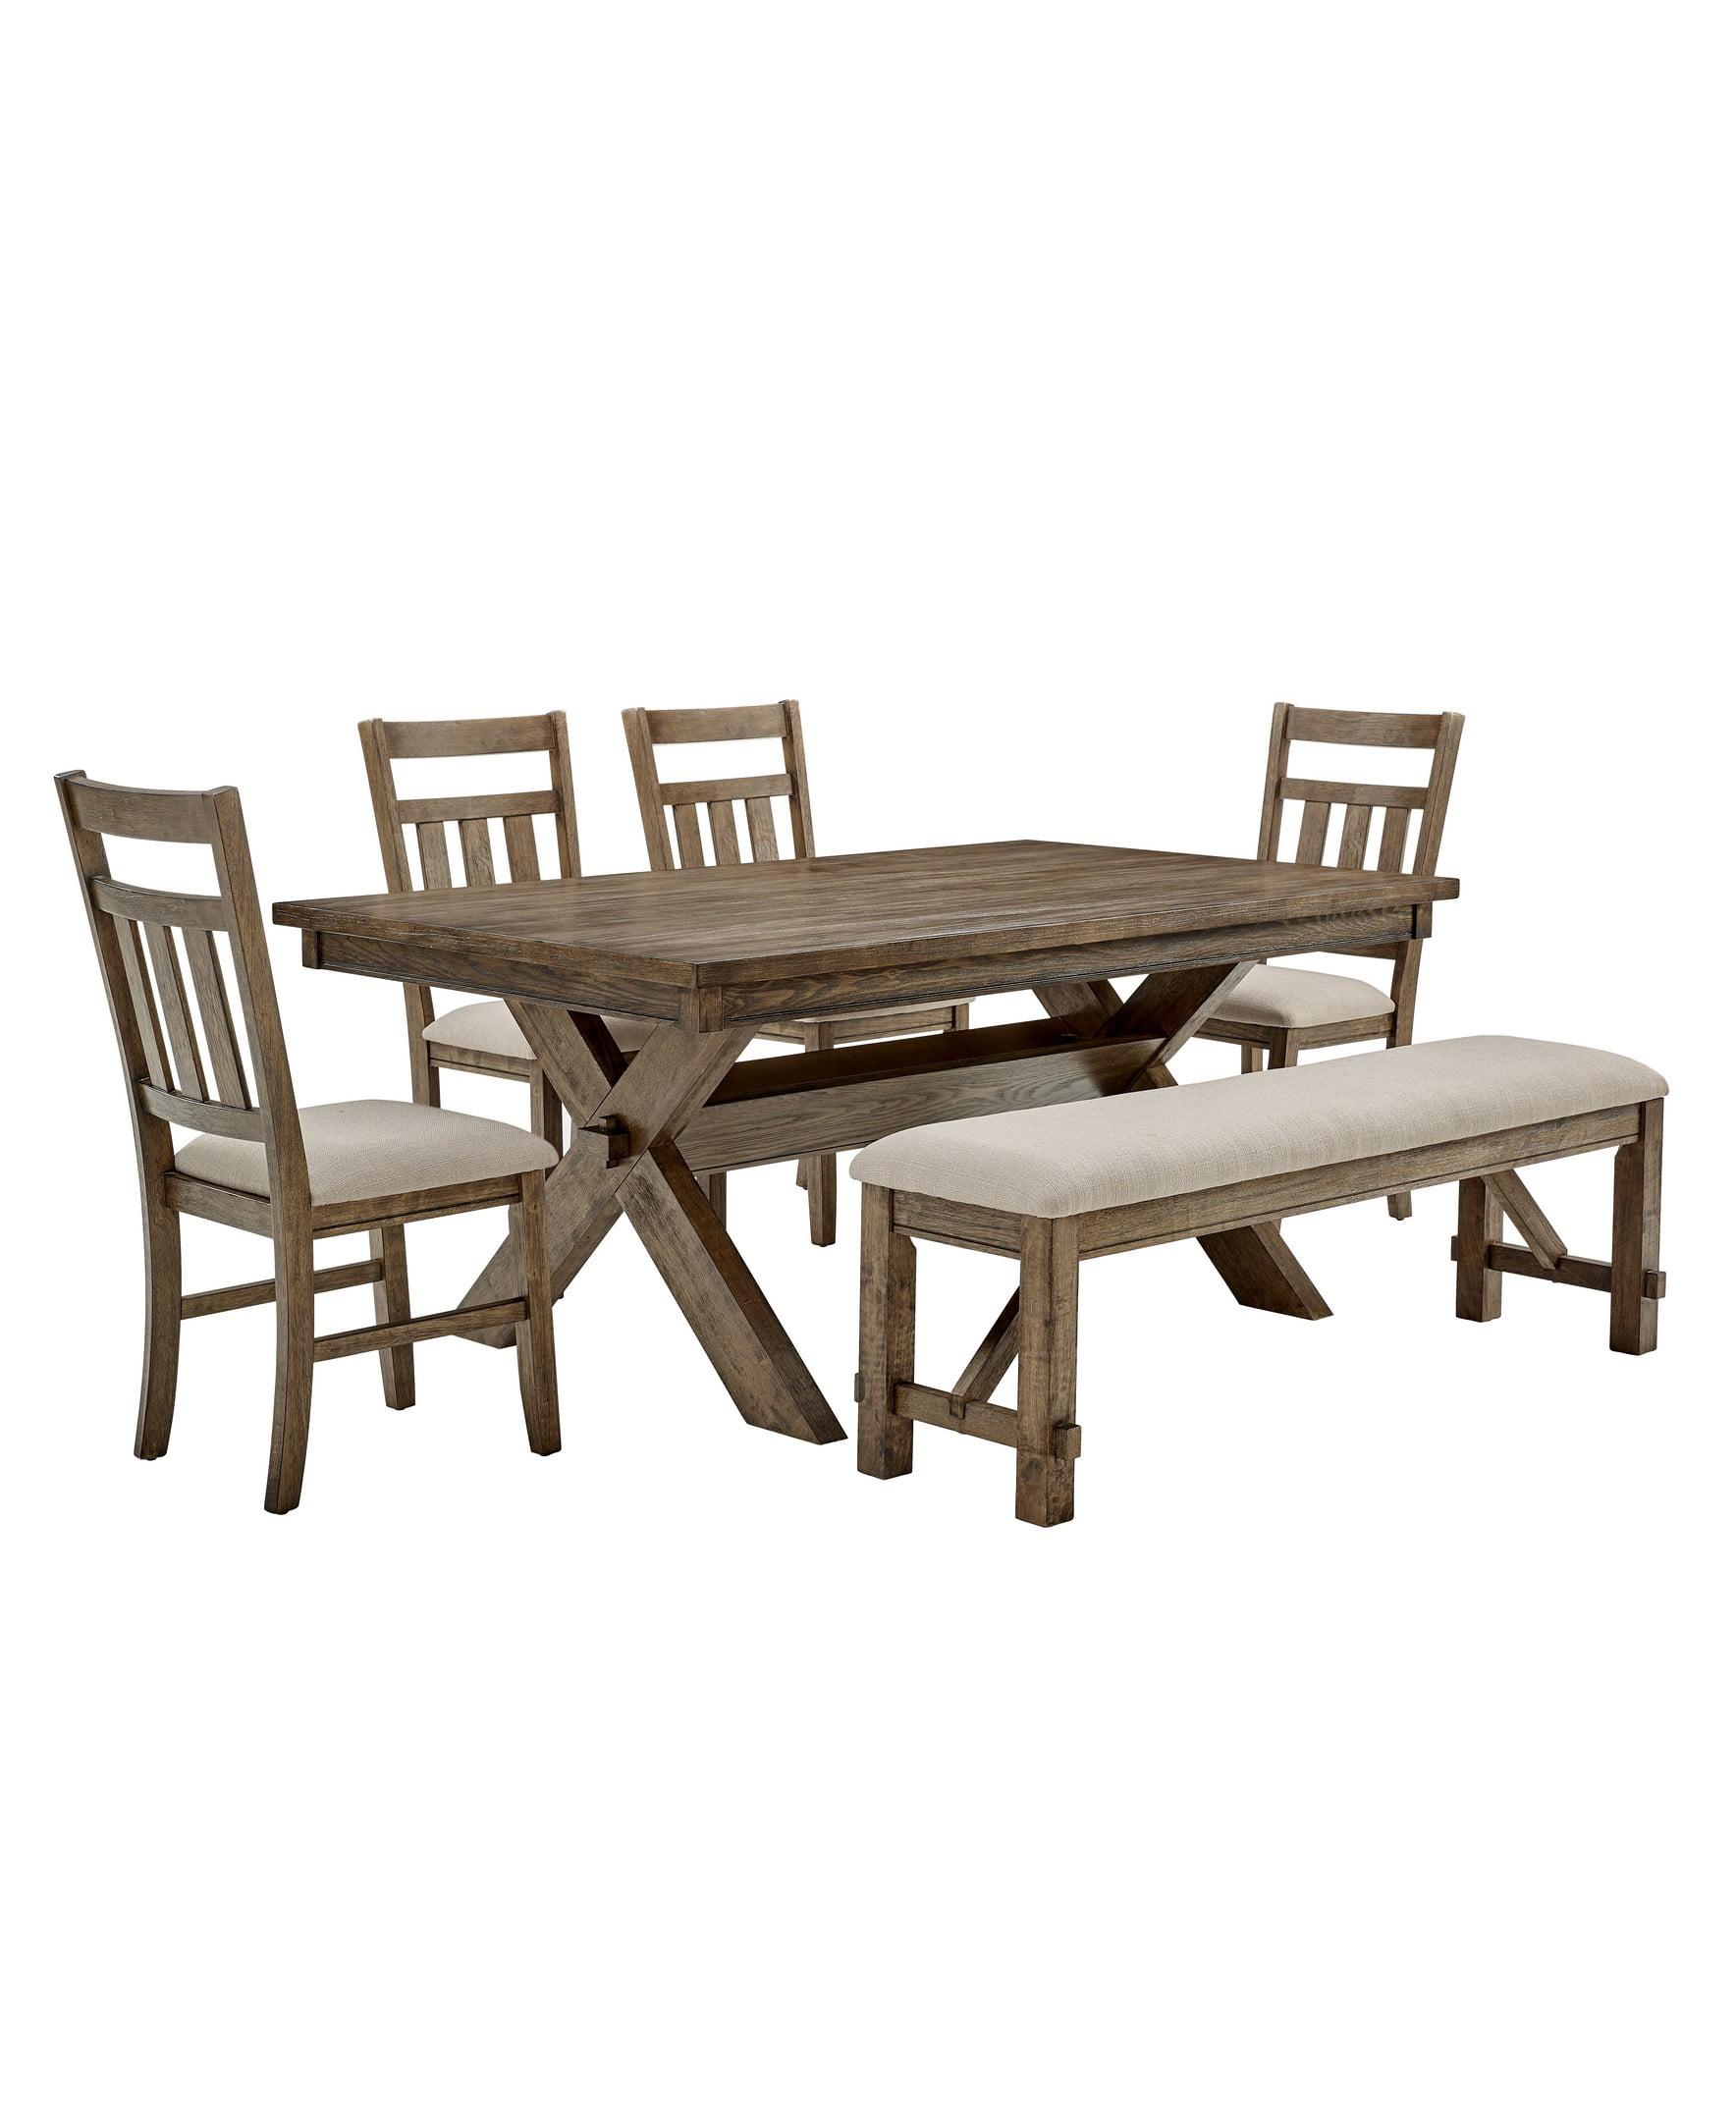 Rustic Umber 6-Piece Farmhouse Dining Set with Tan Fabric Chairs